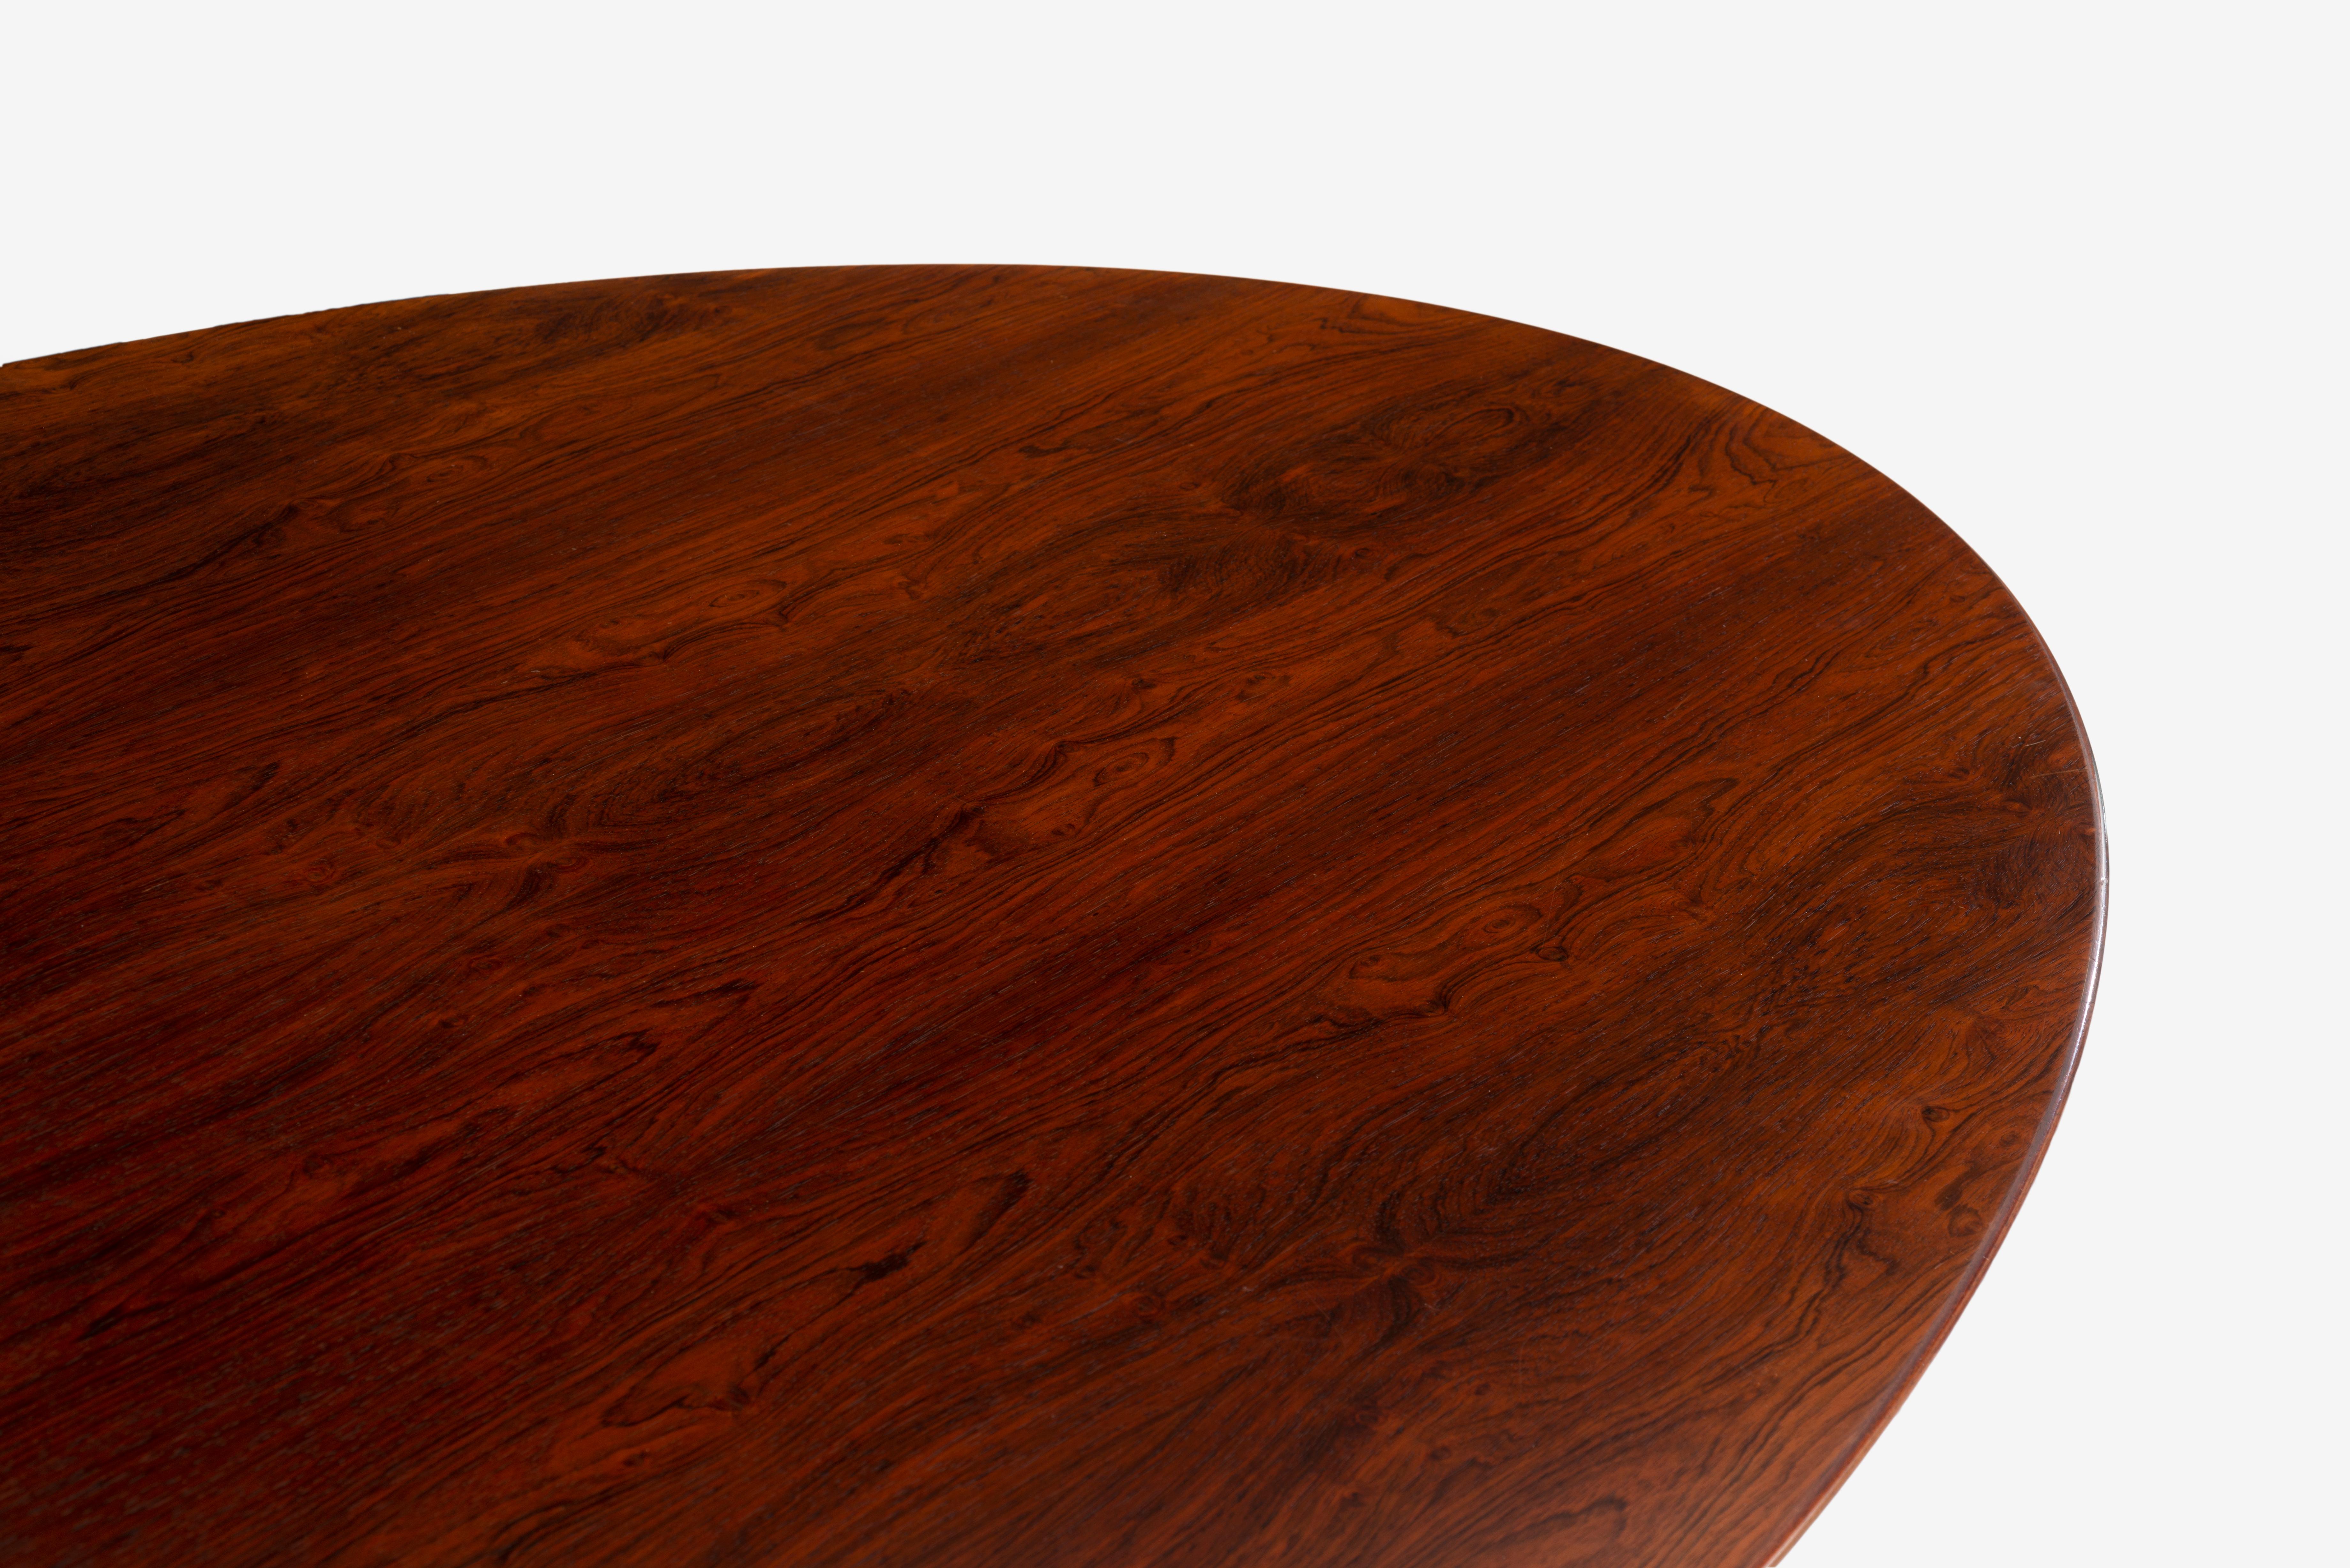 Plated Florence Knoll Rosewood Dining Table or Desk For Sale